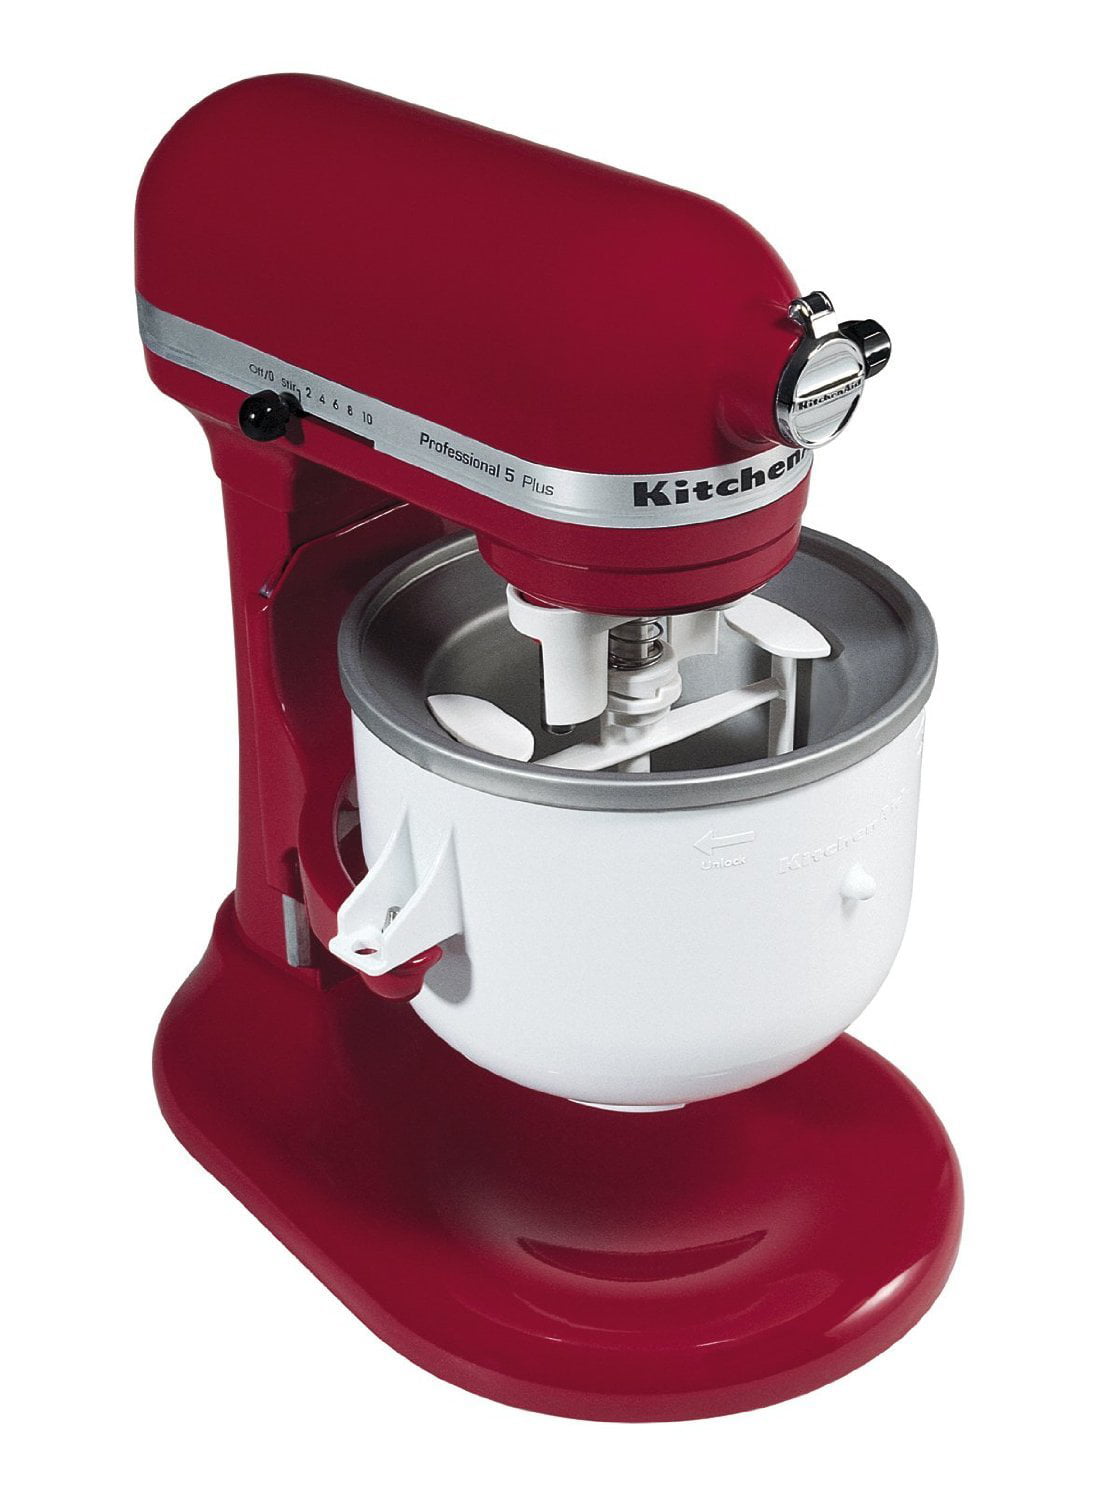 What Model KitchenAid Mixer Does the KitchenAid KICA0WH Ice Cream Maker  Attachment Work With?